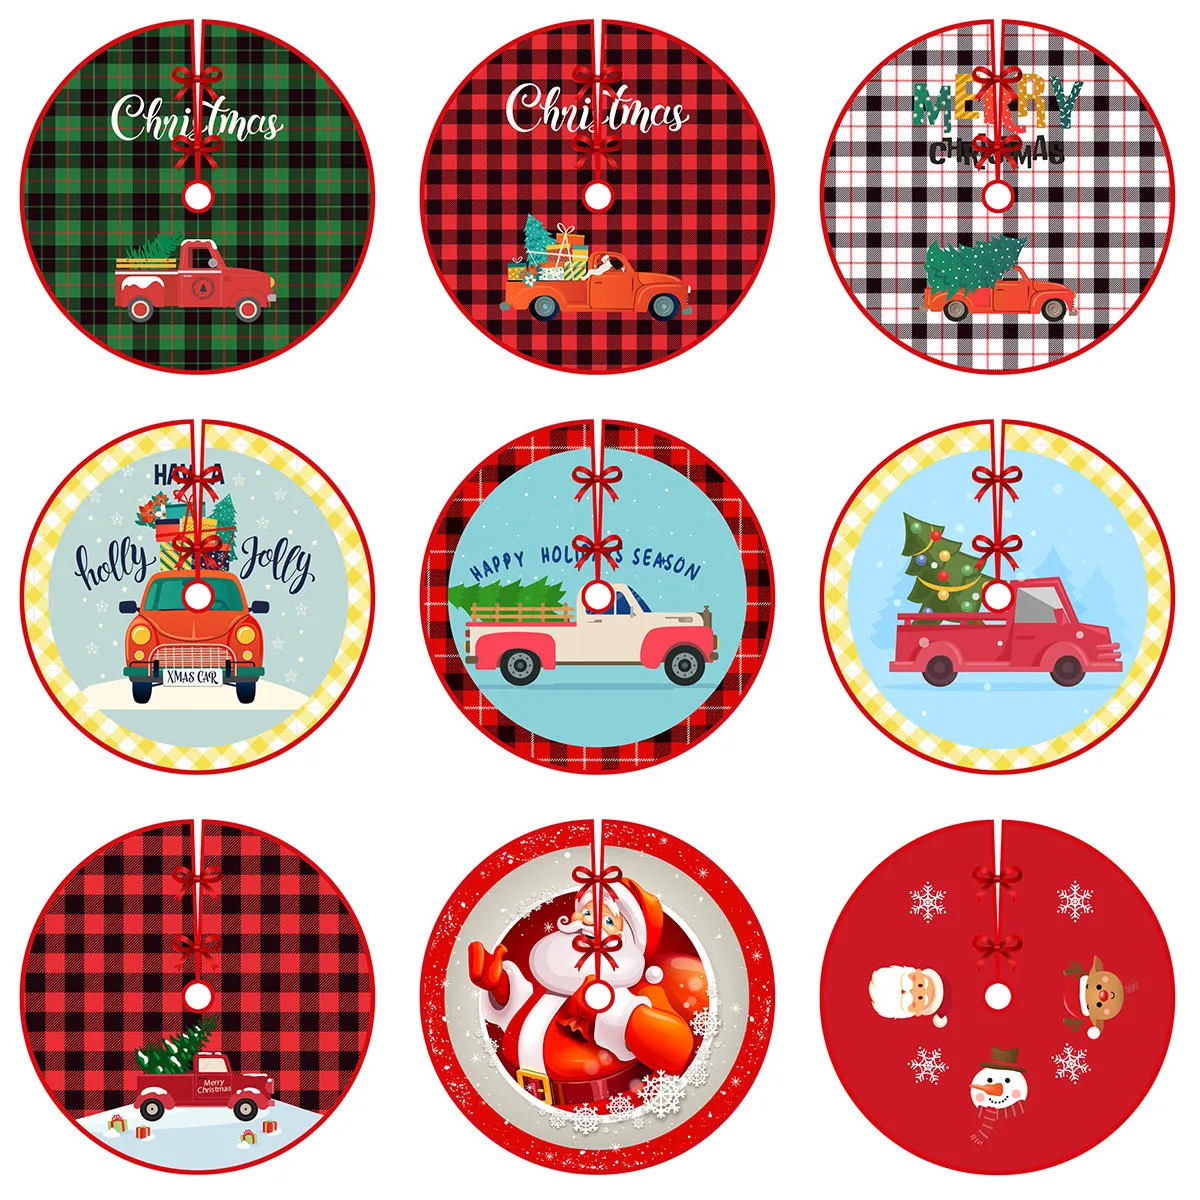 

Christmas decoration items tree skirt red green plaid variety cute cartoon style festive home essentials atmosphere creation